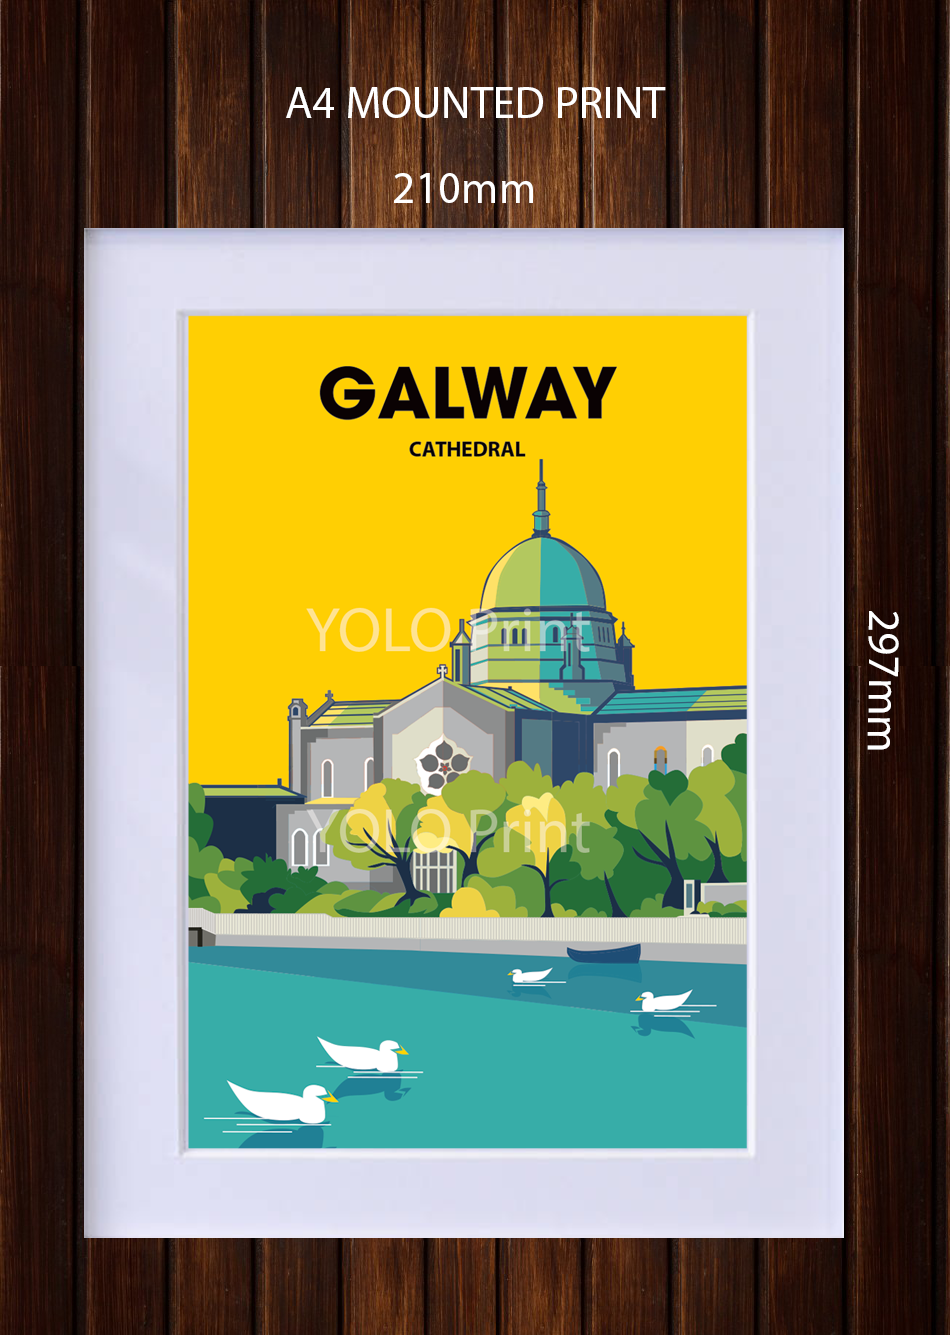 Galway Postcard or A4 Mounted Print or Fridge Magnet - Cathedral